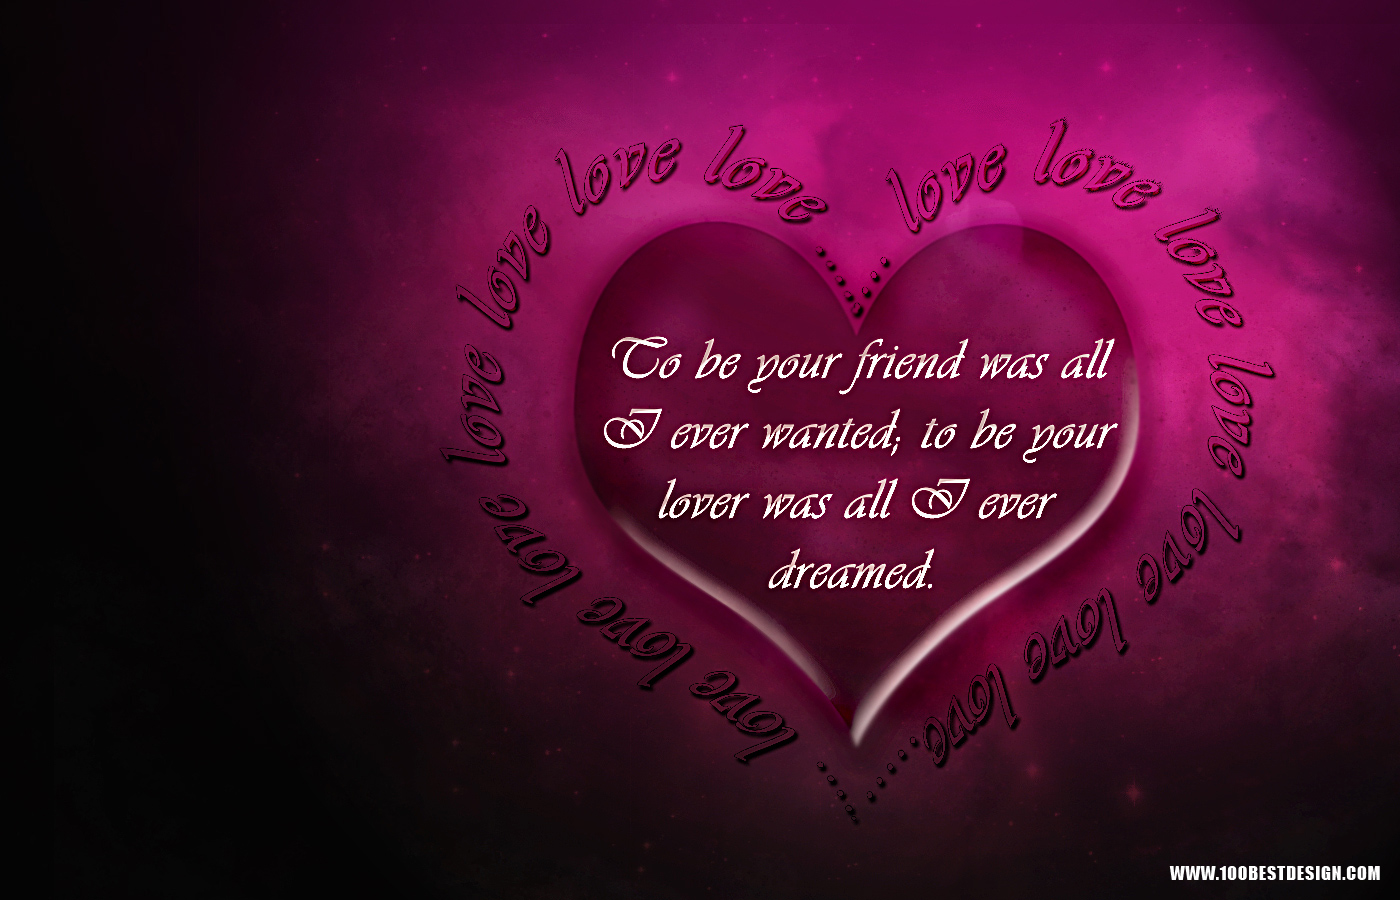 good wallpapers with love messages